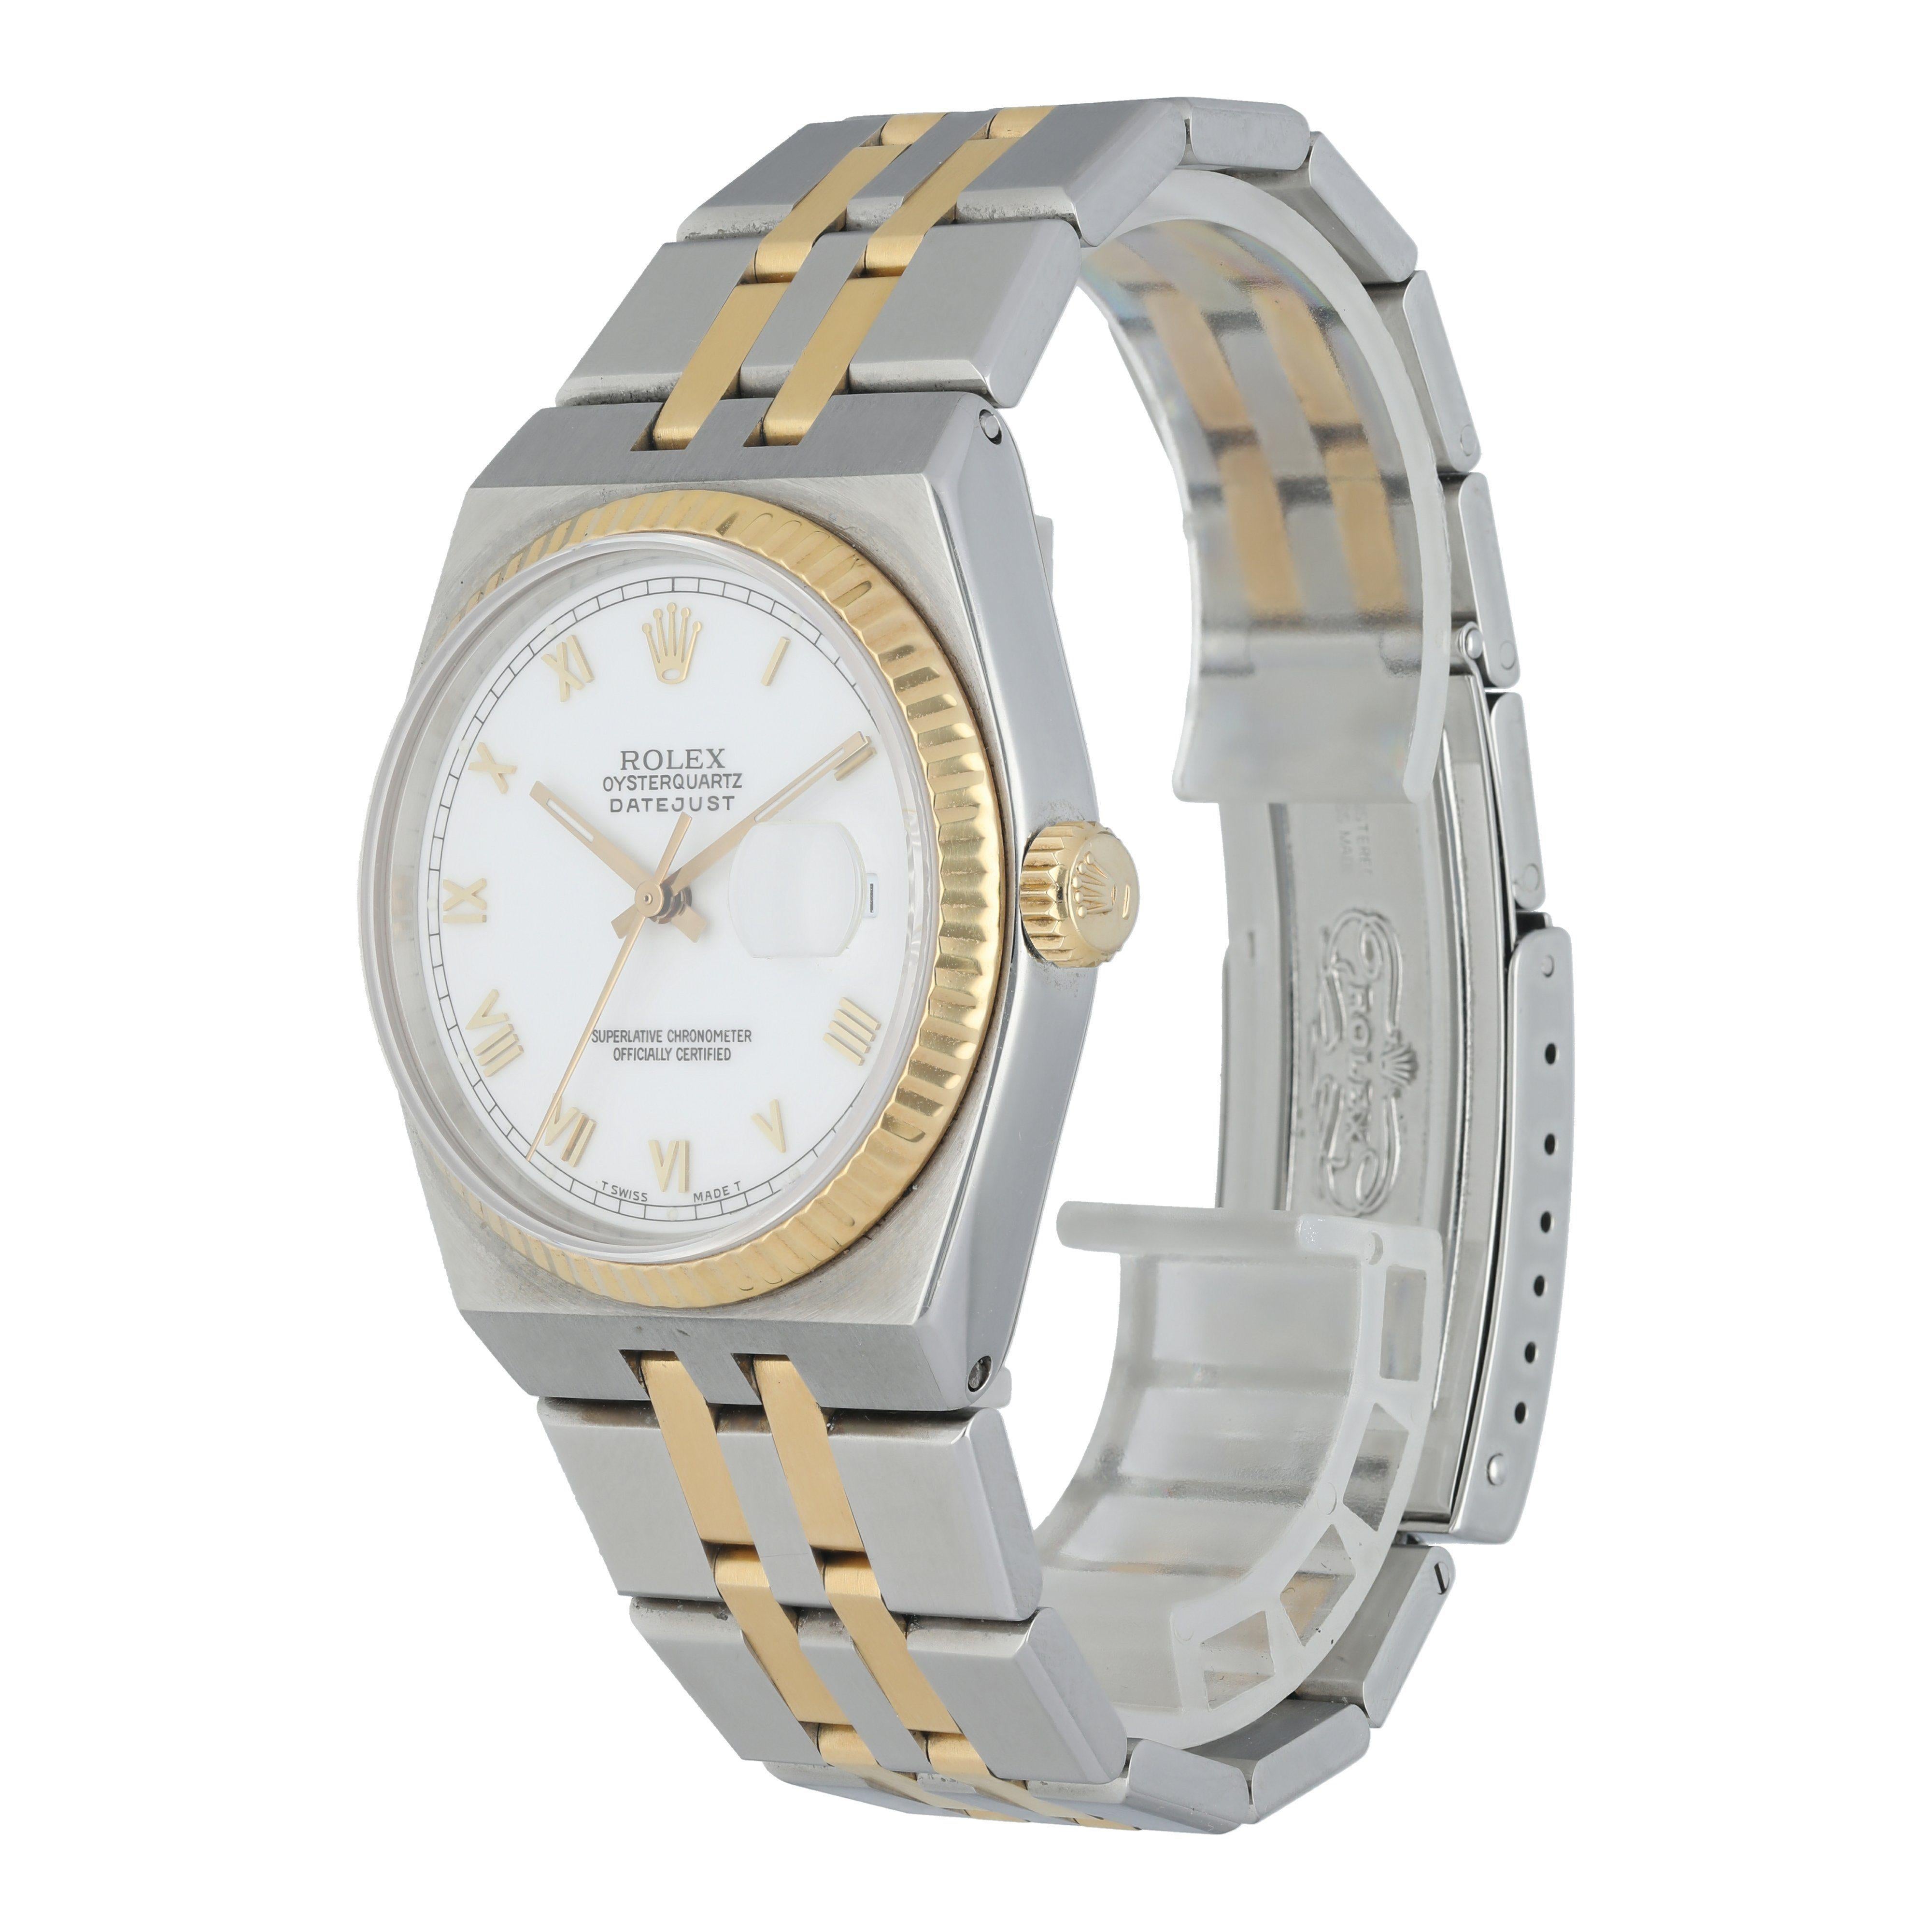 Rolex OysterQuartz Datejust 17013 Men's Watch.
36mm stainless steel case with yellow gold fluted bezel. 
White dial with gold luminous hands and markers. 
Date display at the 3 o'clock position
Stainless steel and yellow gold bracelet with a